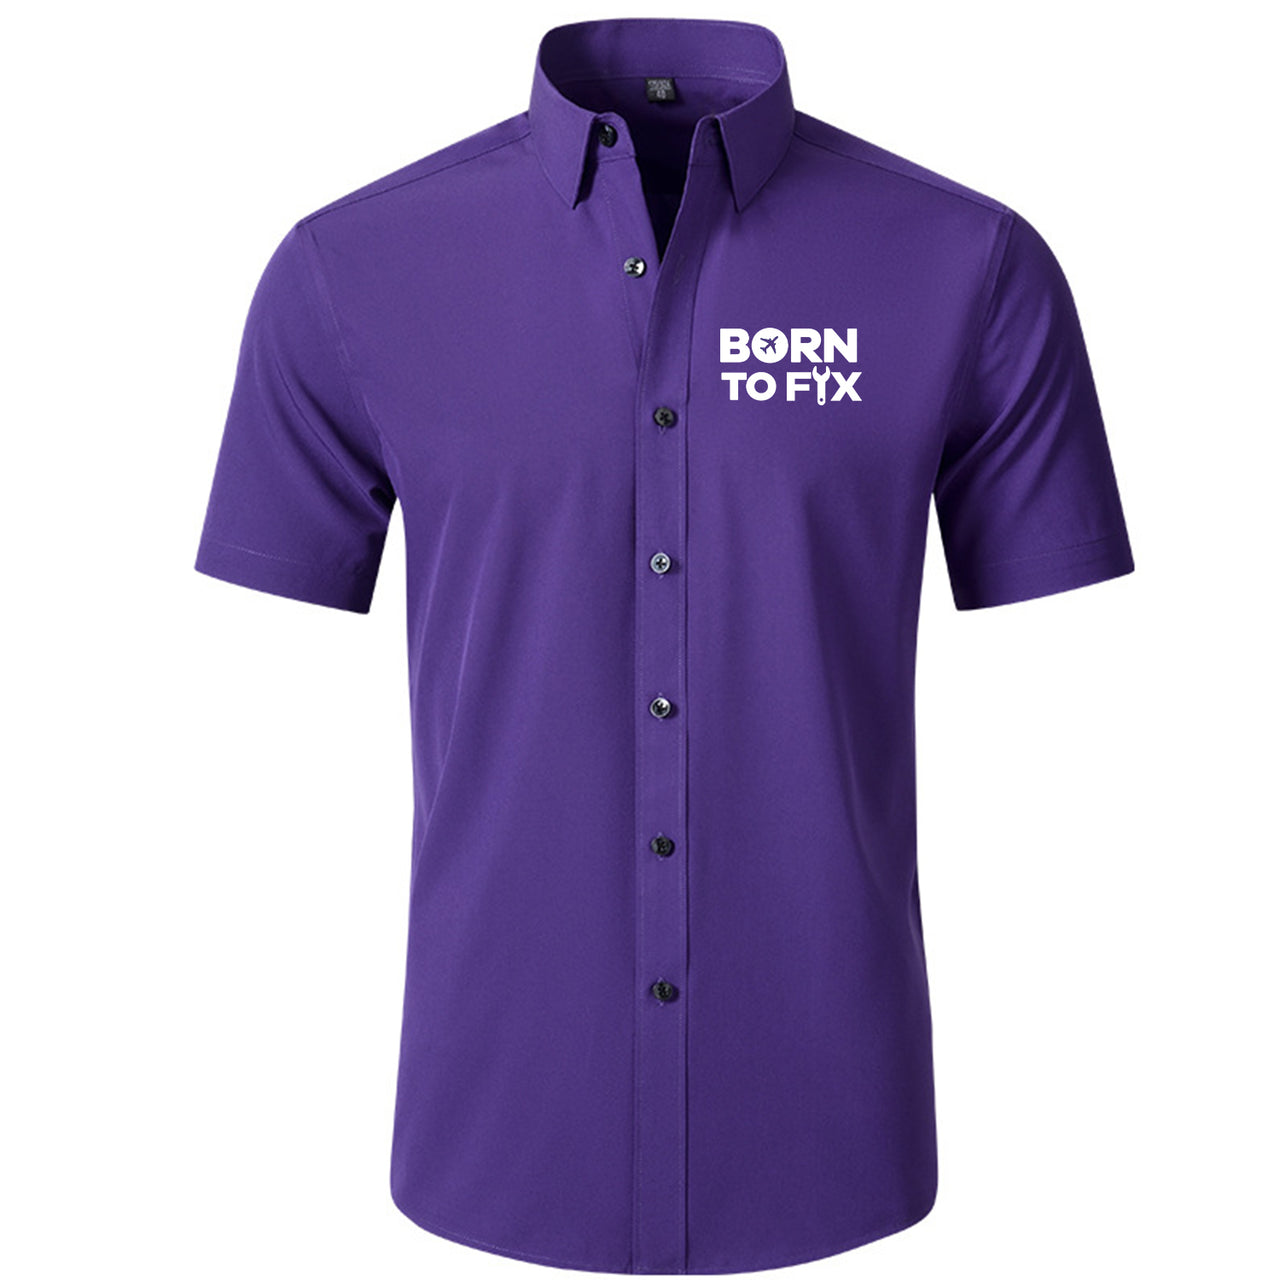 Born To Fix Airplanes Designed Short Sleeve Shirts